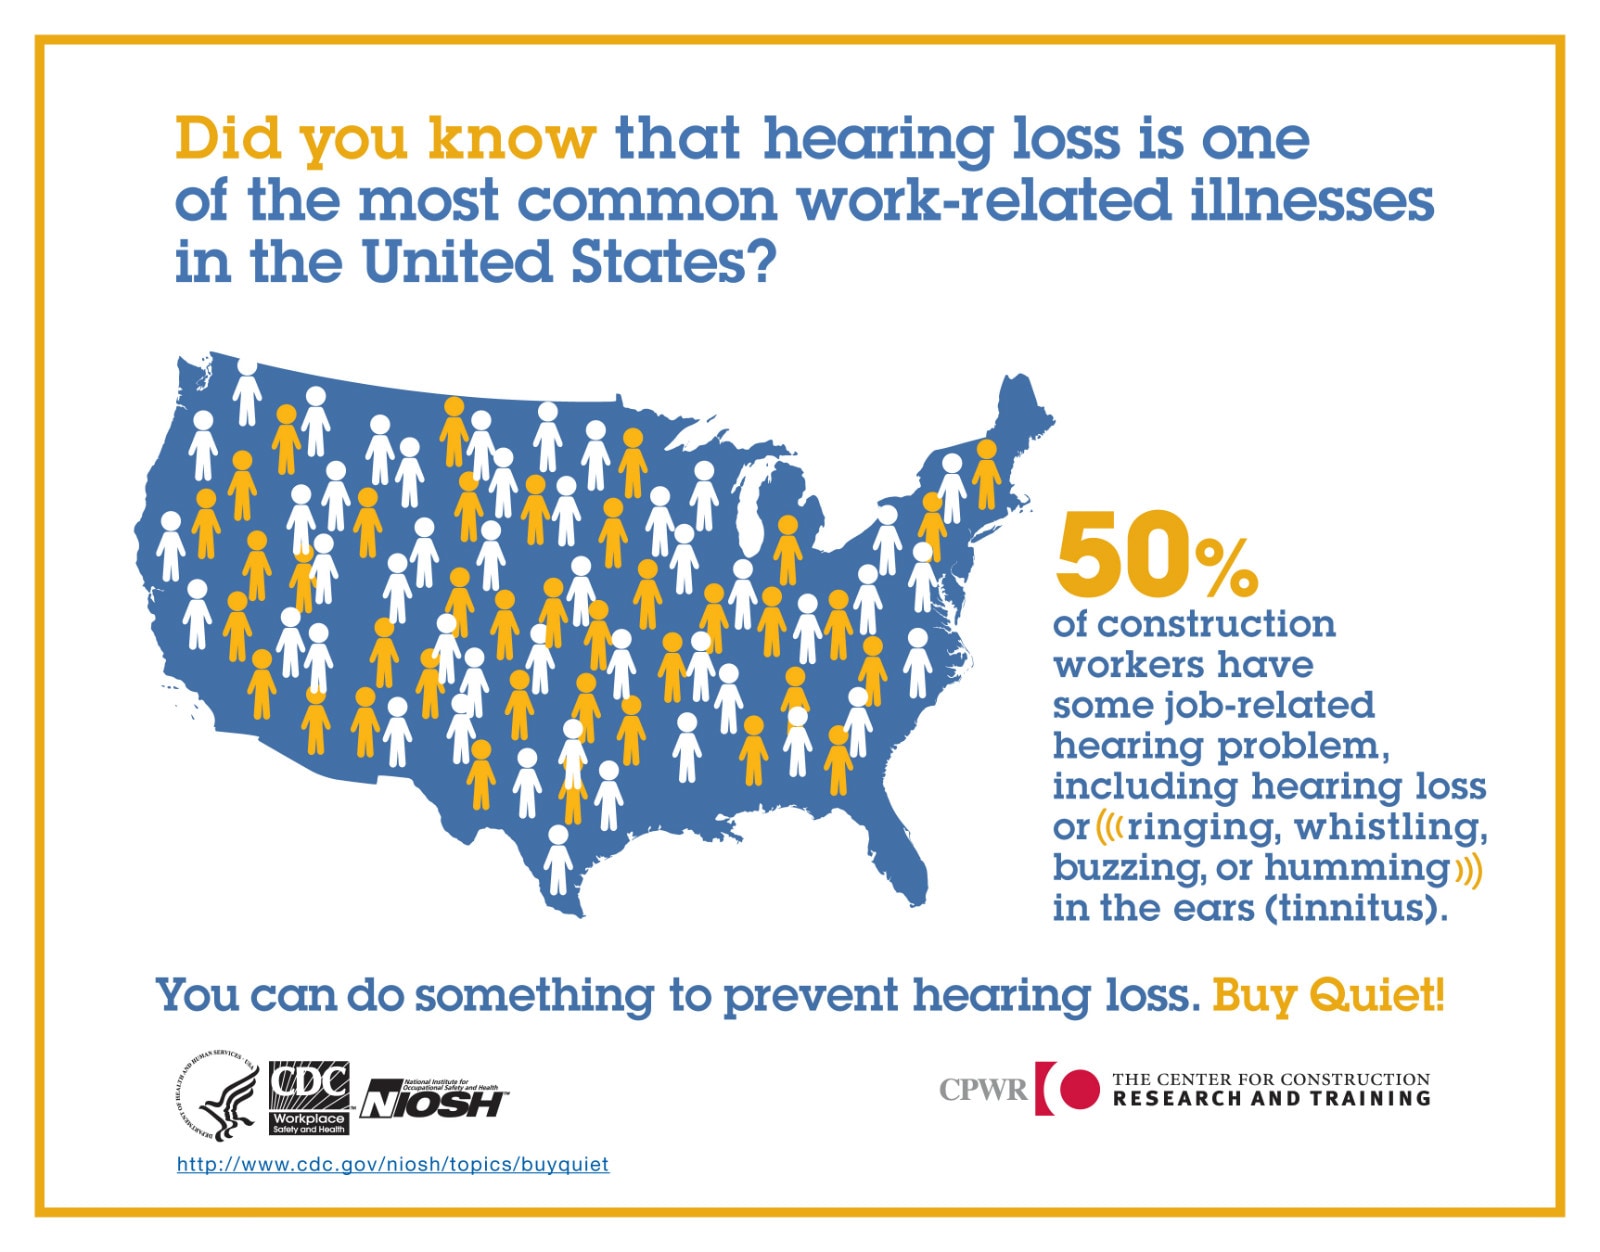 Did you know that hearing loss is one of the most common work-related illnesses in the United States?